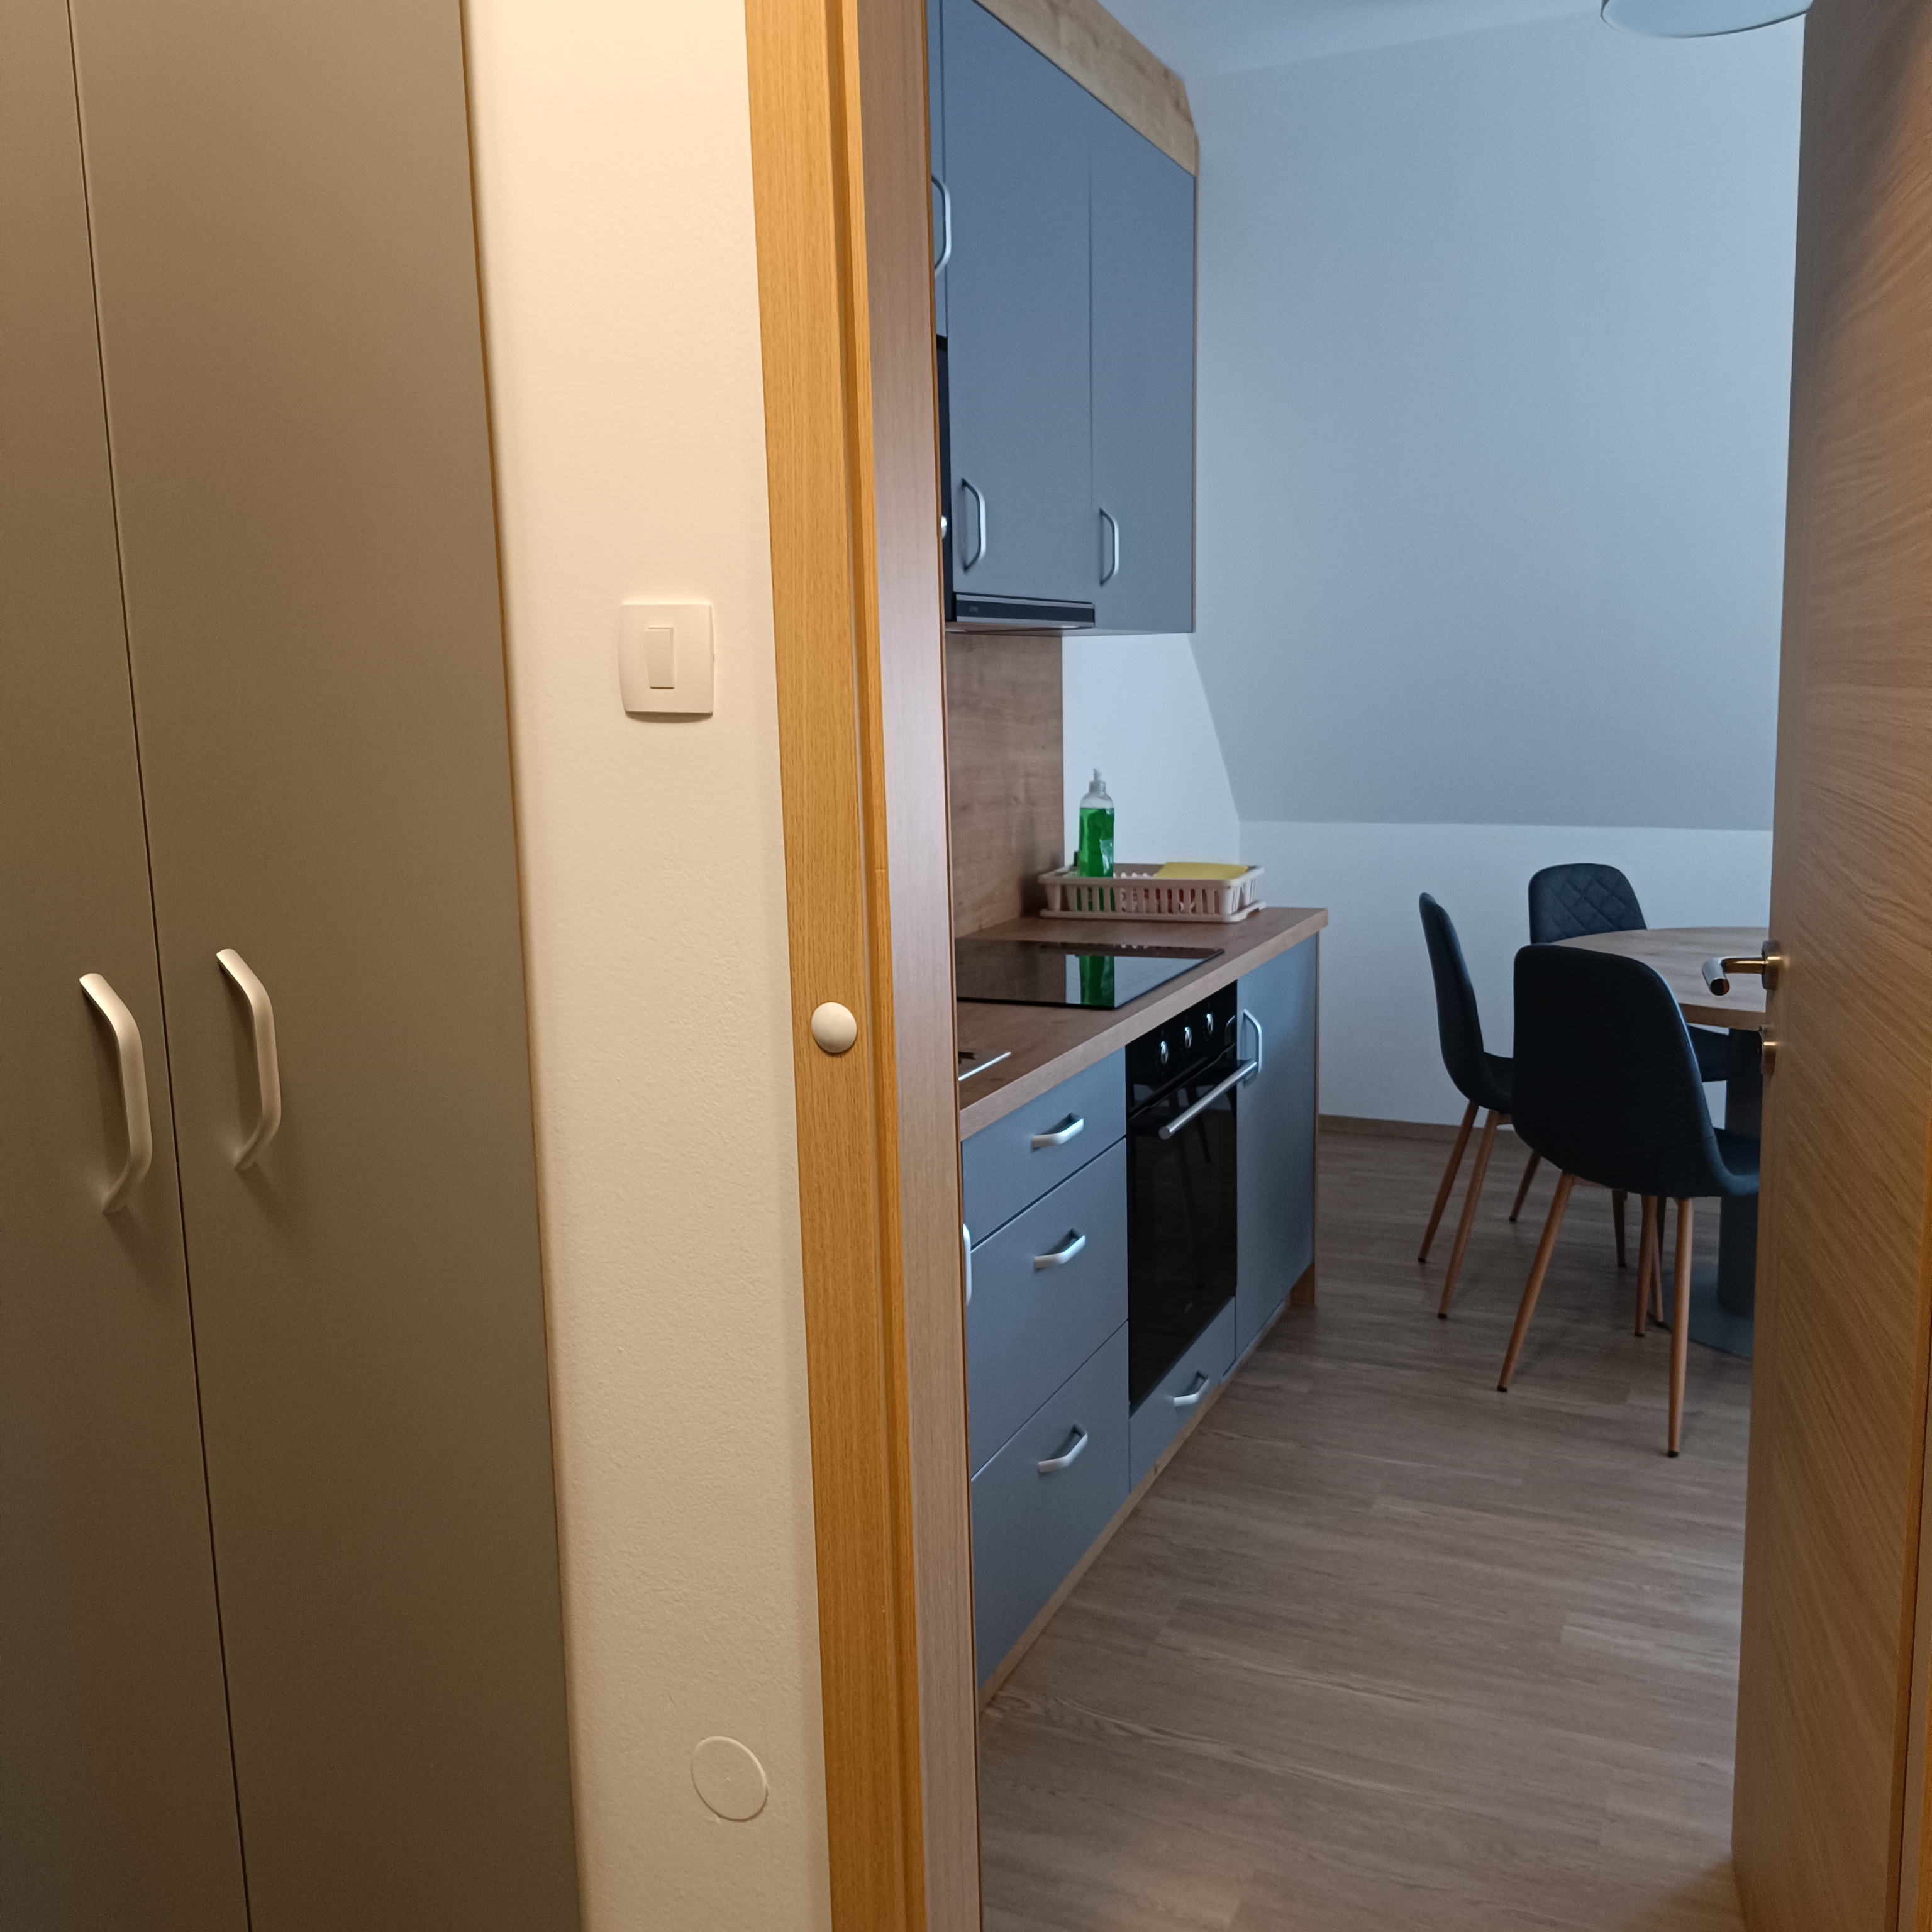 Room with kitchen 19